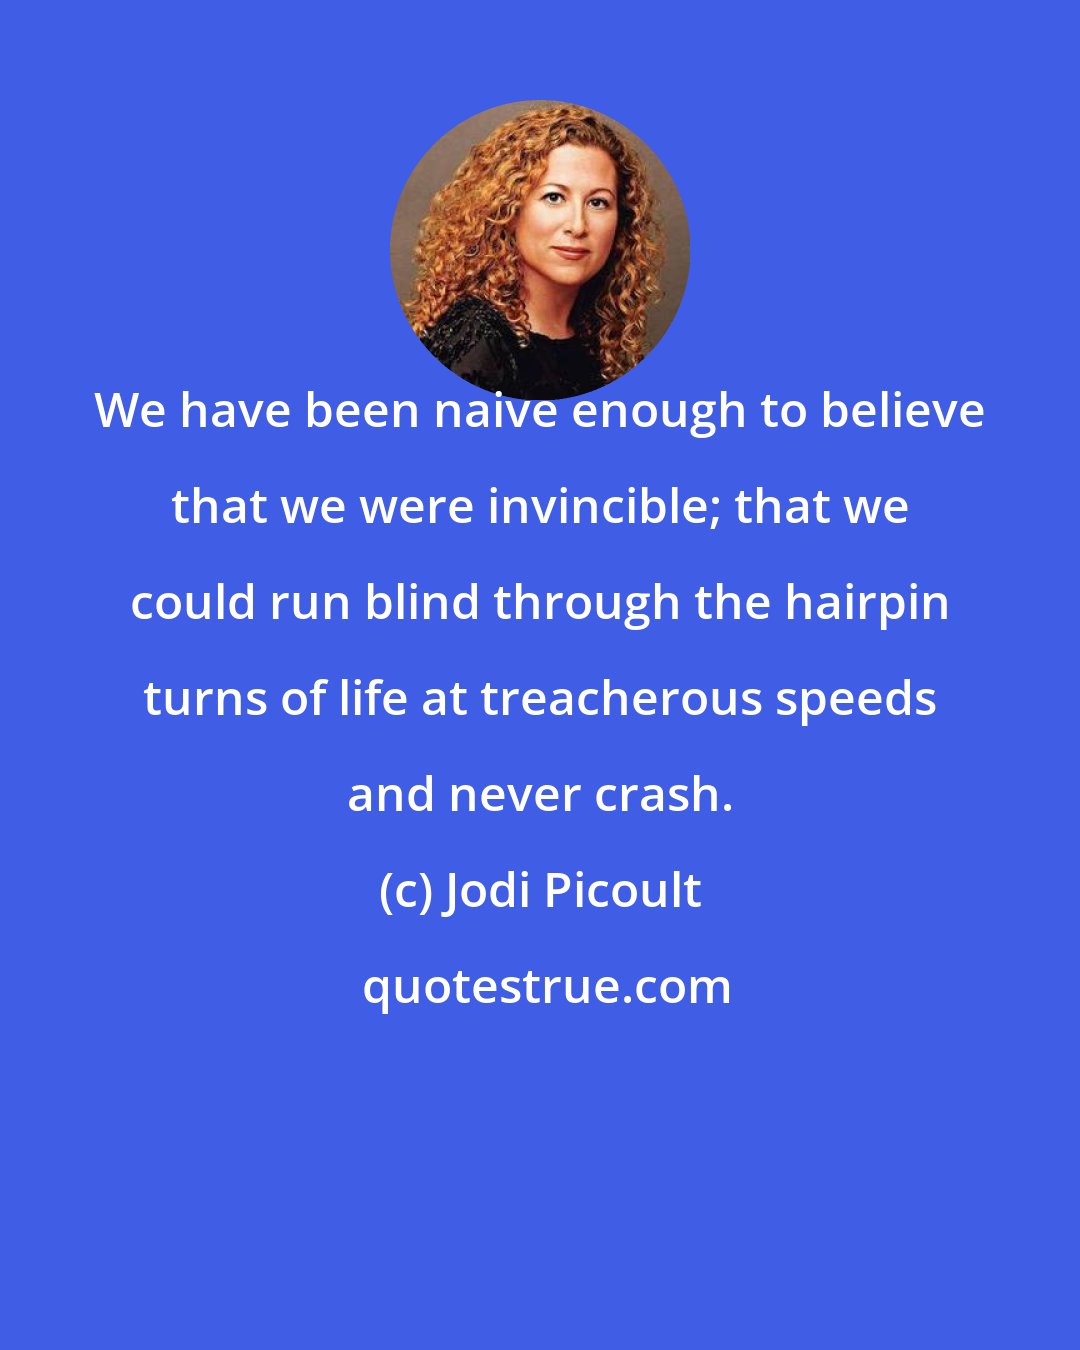 Jodi Picoult: We have been naive enough to believe that we were invincible; that we could run blind through the hairpin turns of life at treacherous speeds and never crash.